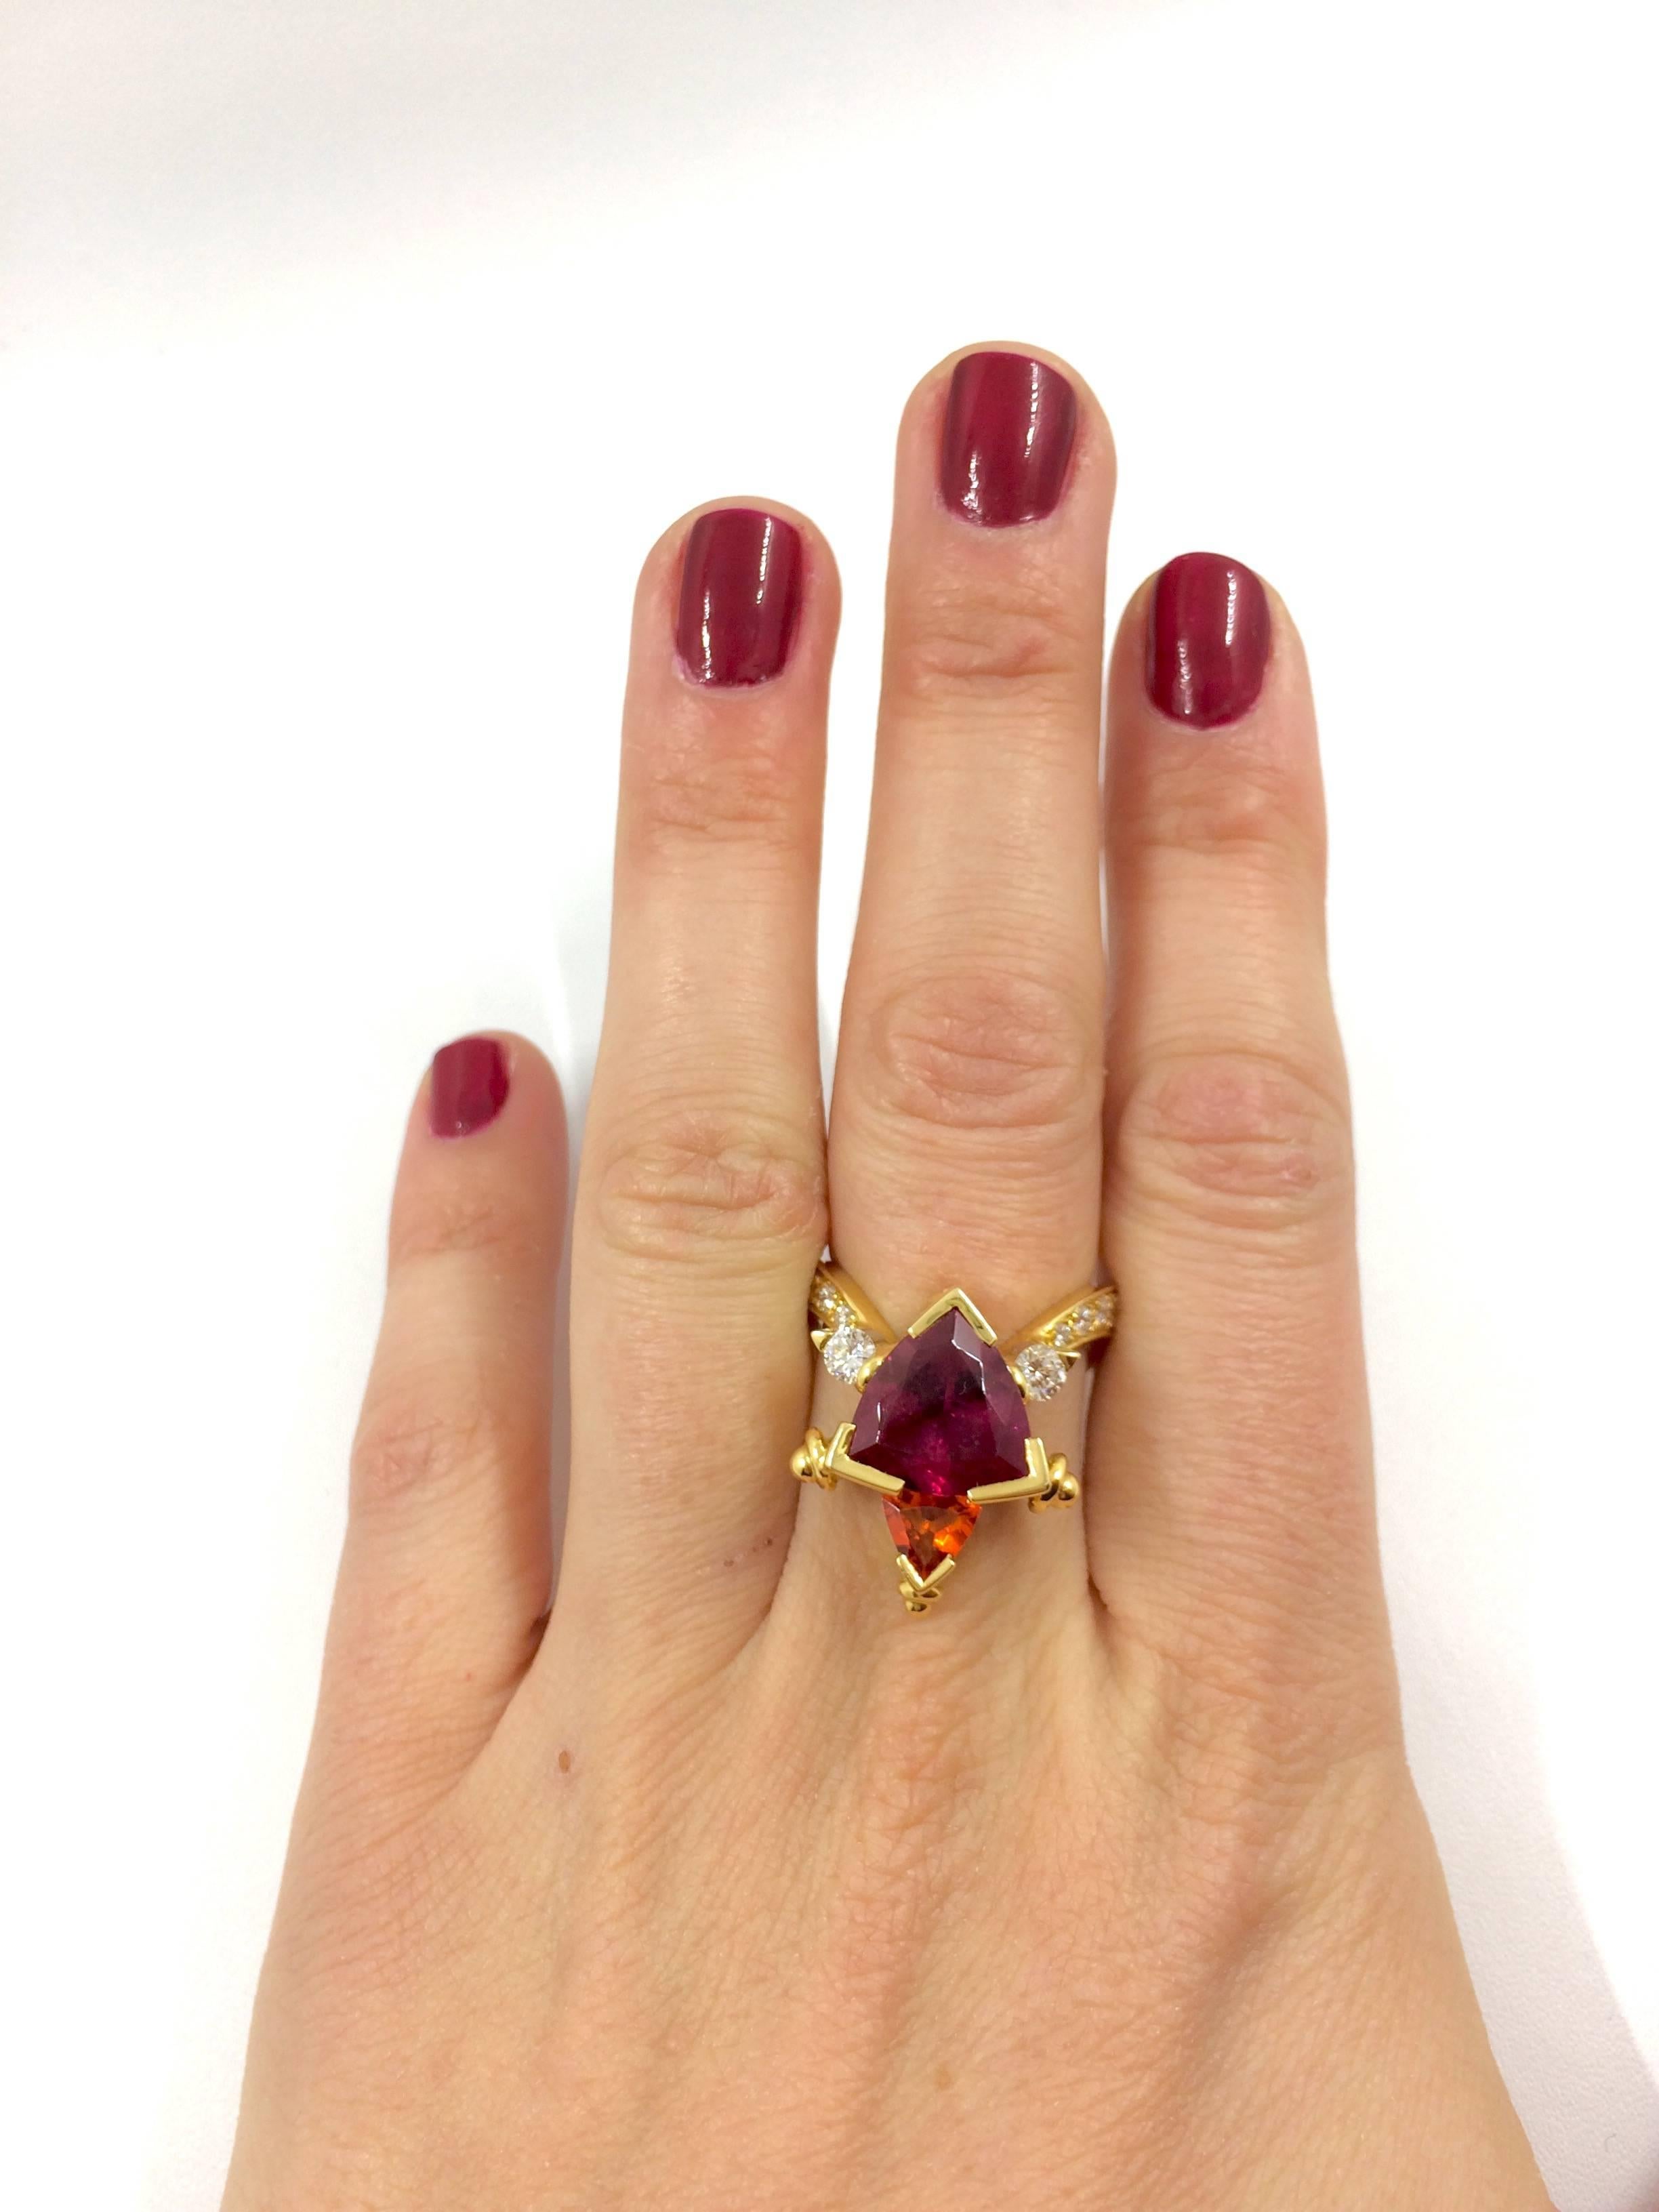 A yellow gold ring set in the middle with a stunning rubelite surmounted by a mandarin garnet. Six brilliant cut diamonds surrounded the rubelite on each side. The ring's body is waved like a swan. 
The ring is an unique creation entirely